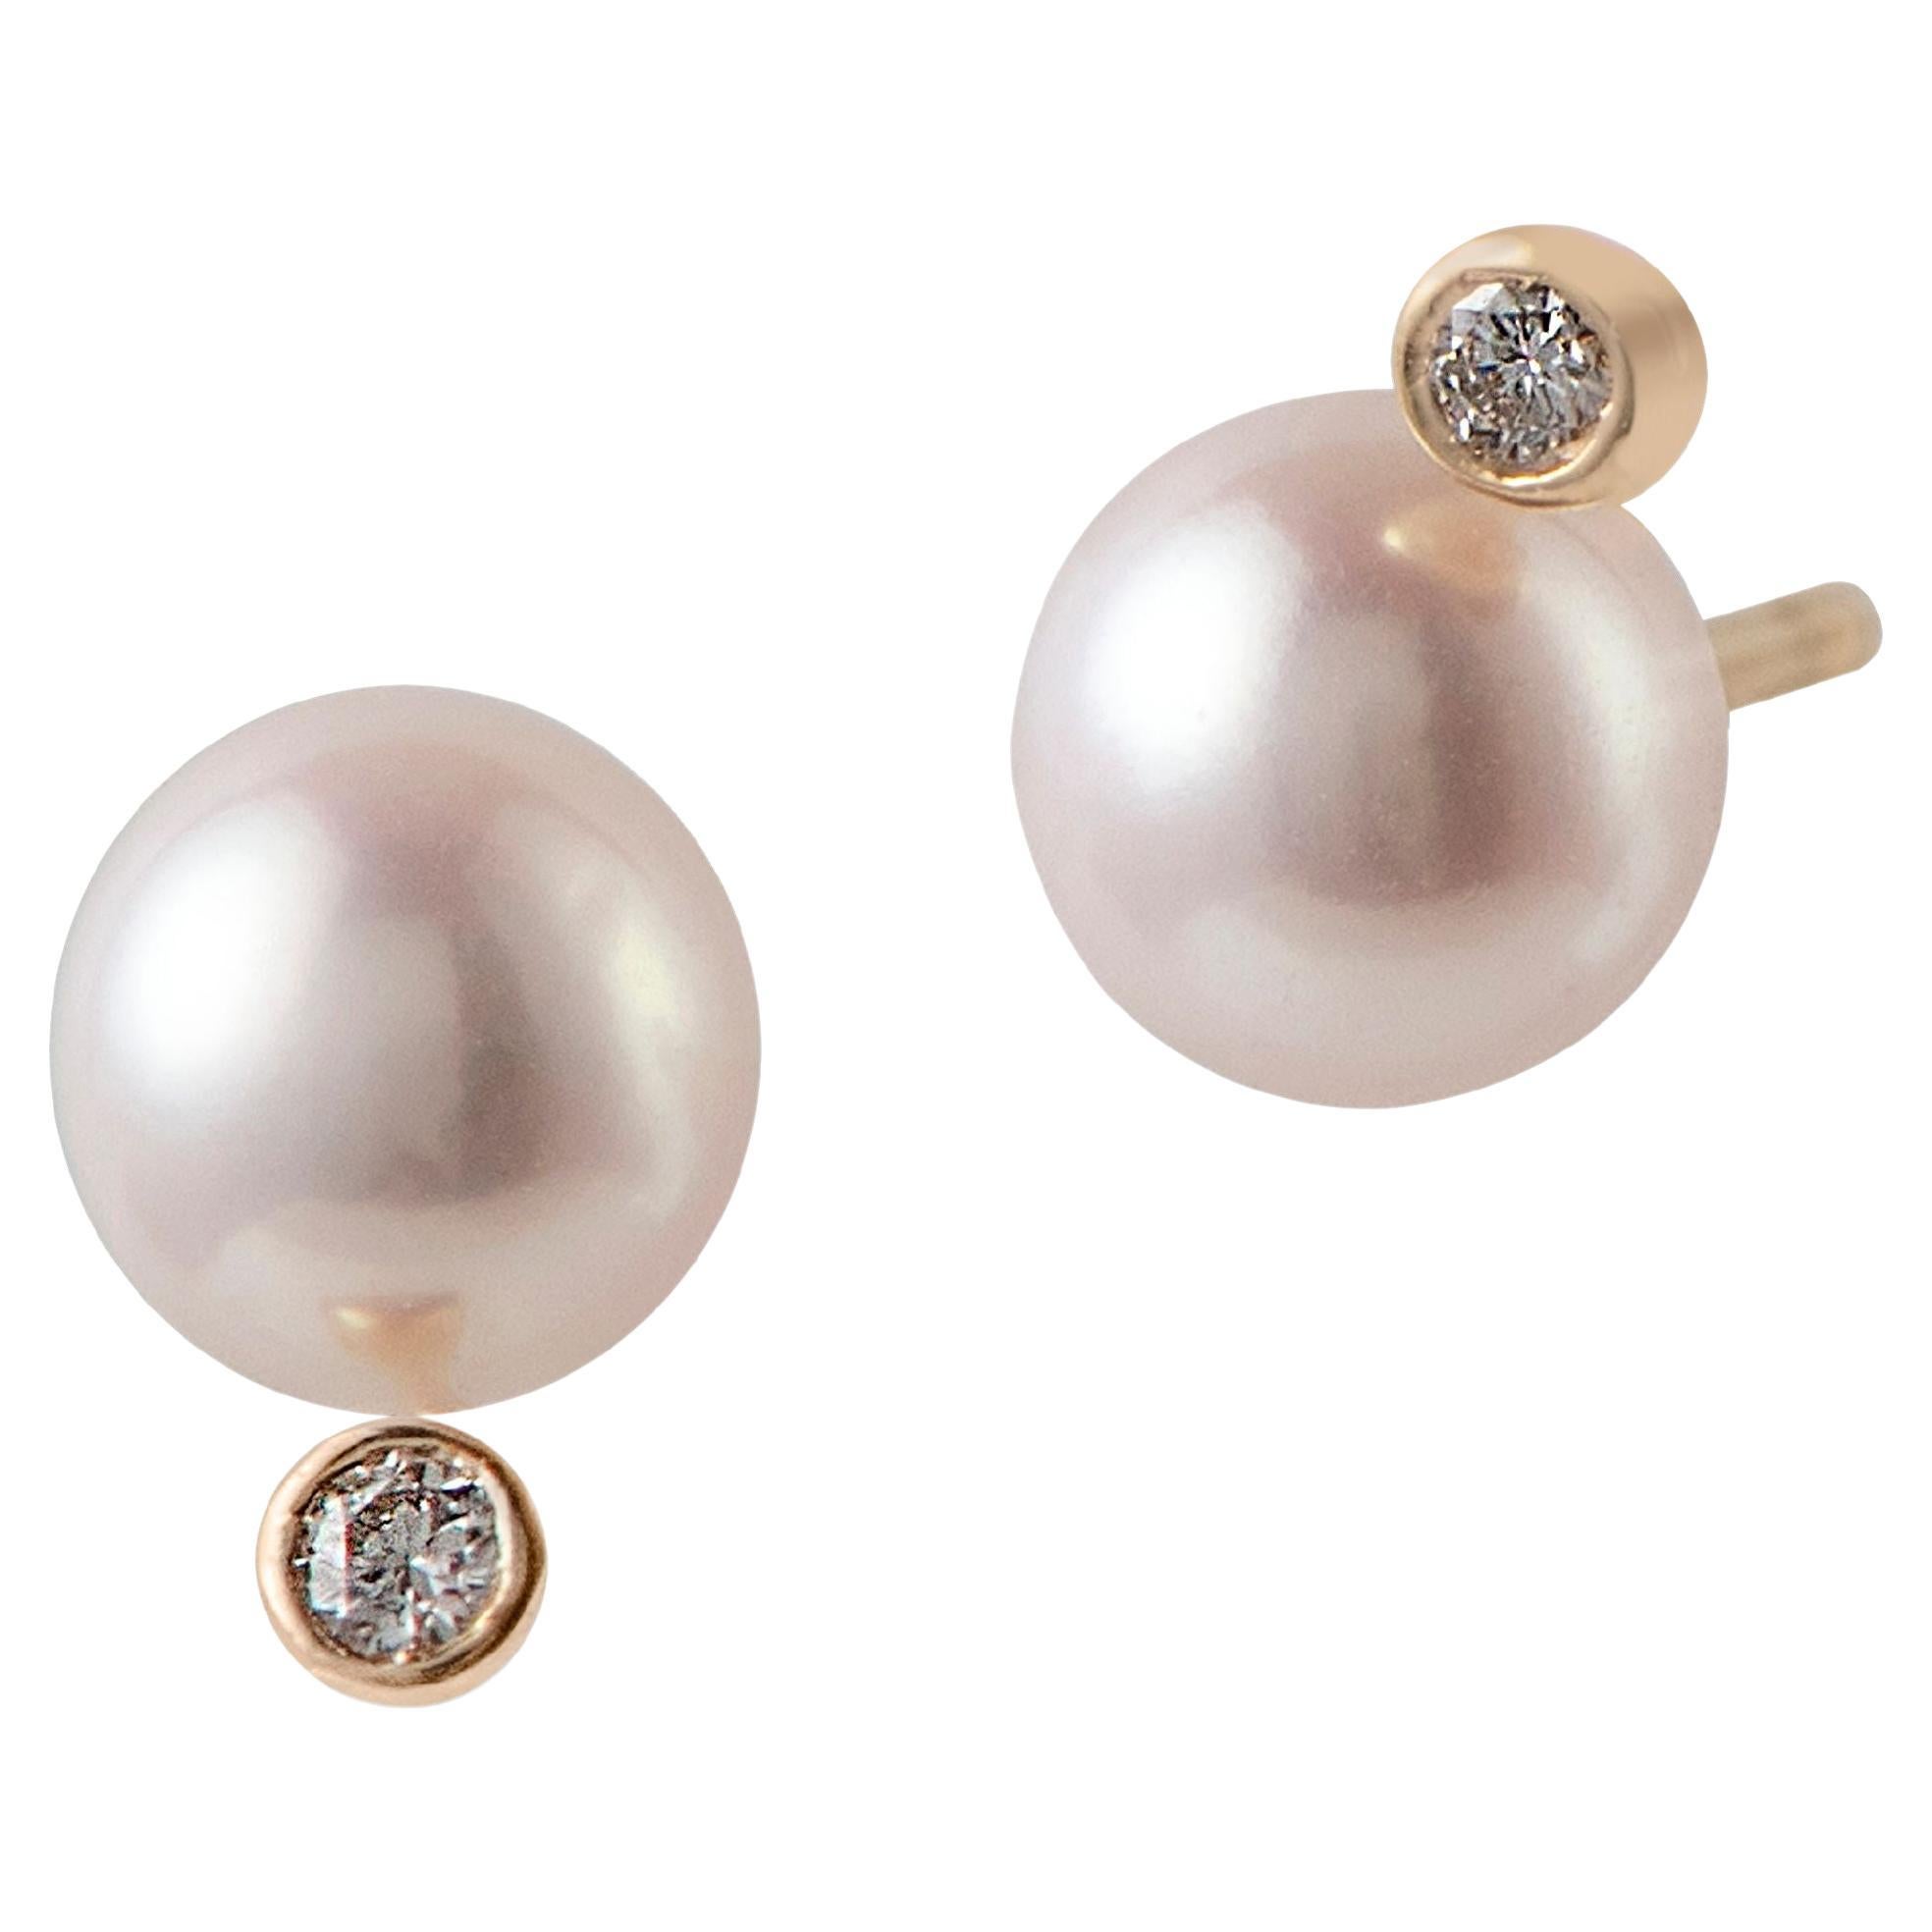 Diamond Micropave earrings with Baroque Pearls, by Michelle Massoura ...